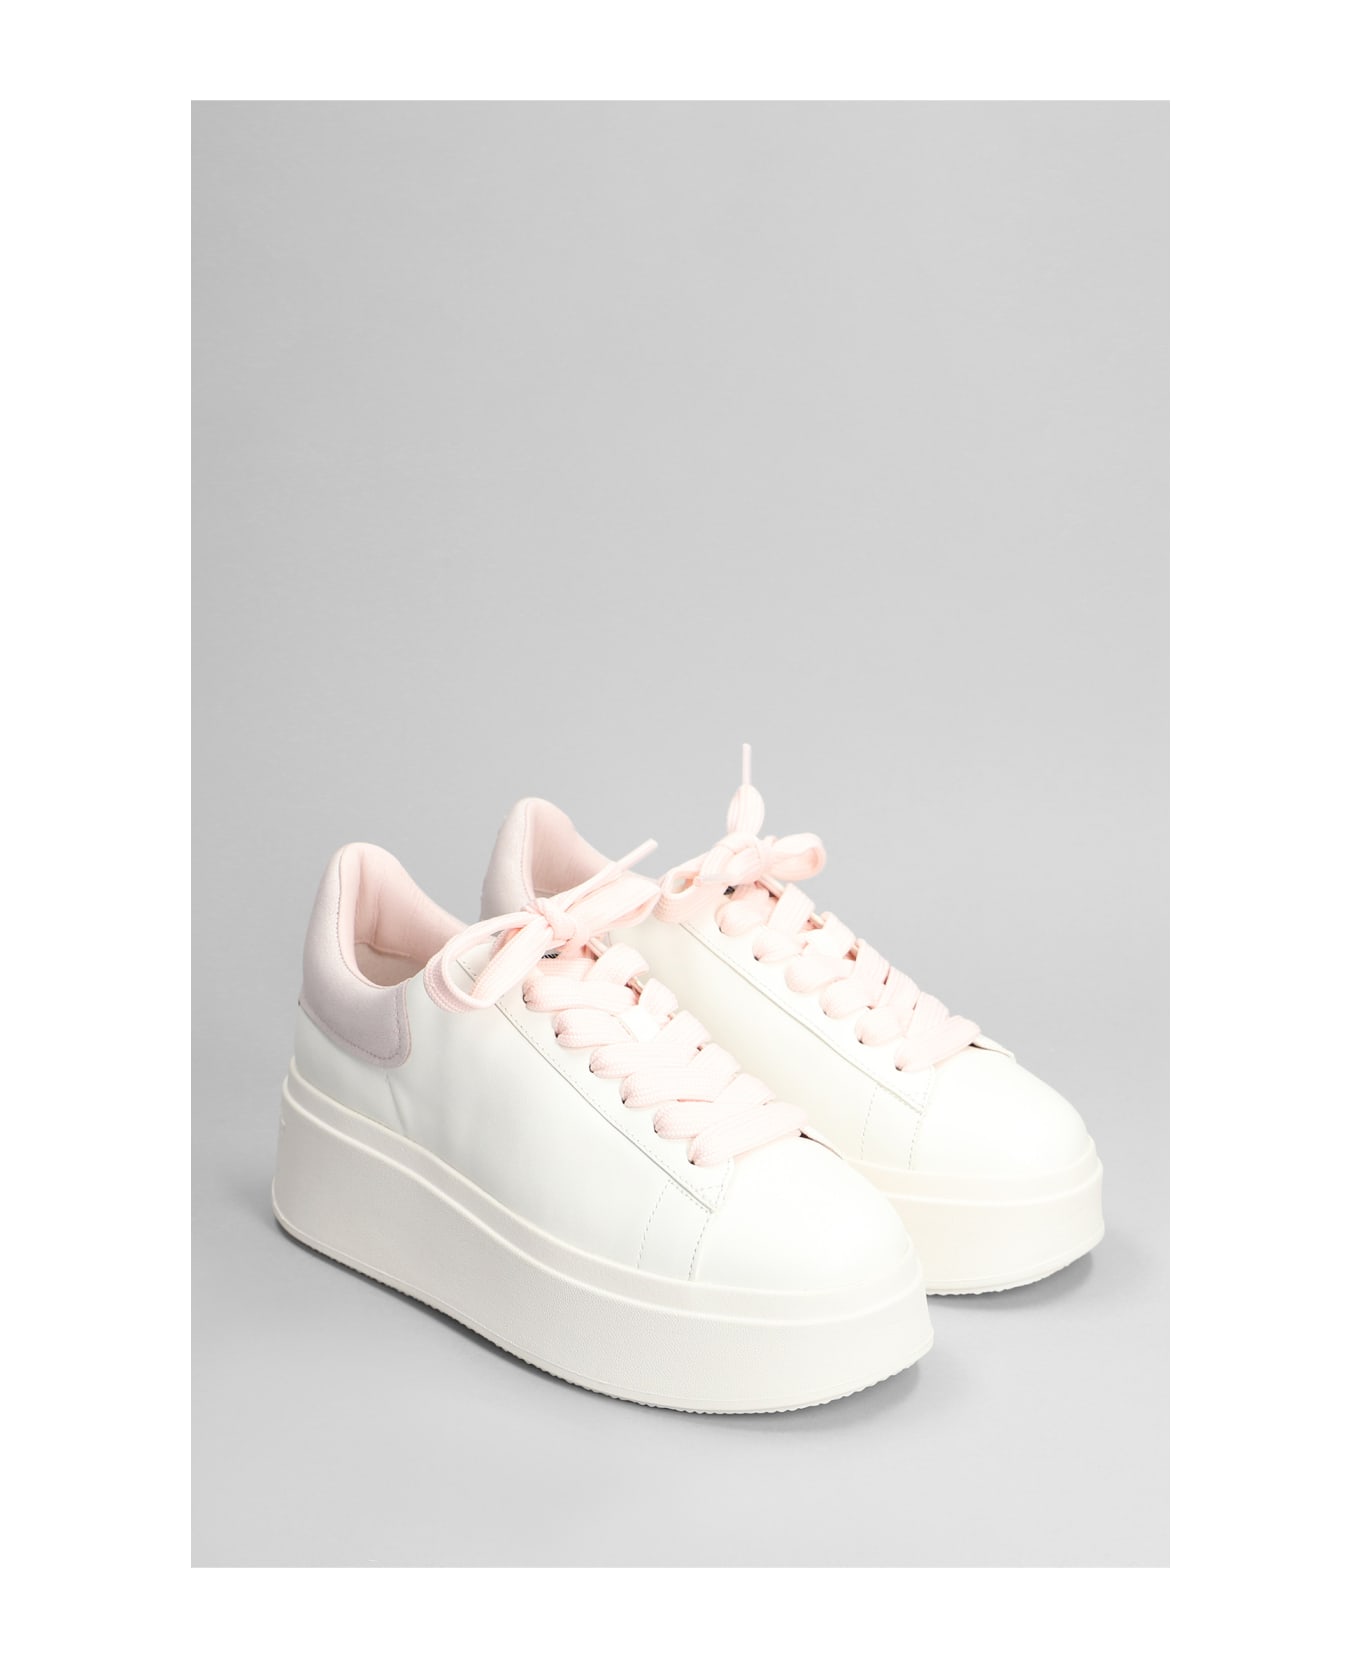 Ash Moby Bekind Sneakers In White Leather - white